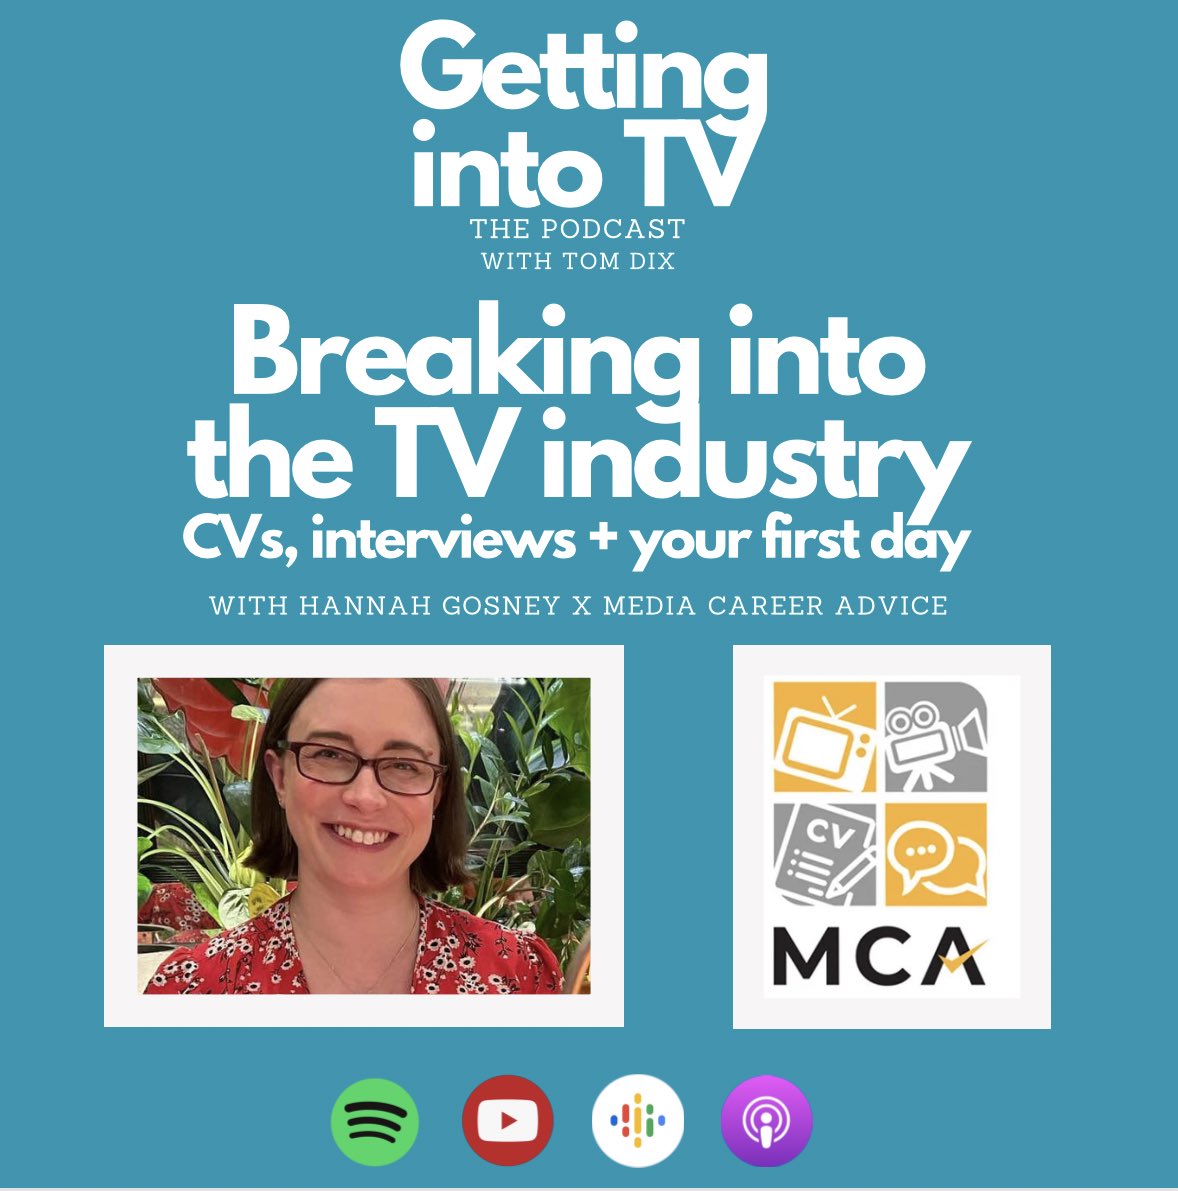 EP27. PRODUCTION MANAGEMENT & BREAKING INTO TV 📺 @MediaCareerAdv1 chats all things production management + shares their tips for writing a good TV CVs, the interview process + keeping yourself skilled. 📺 YOUTUBE - shorturl.at/bgjq1 🔈 SPOTIFY - shorturl.at/koU18